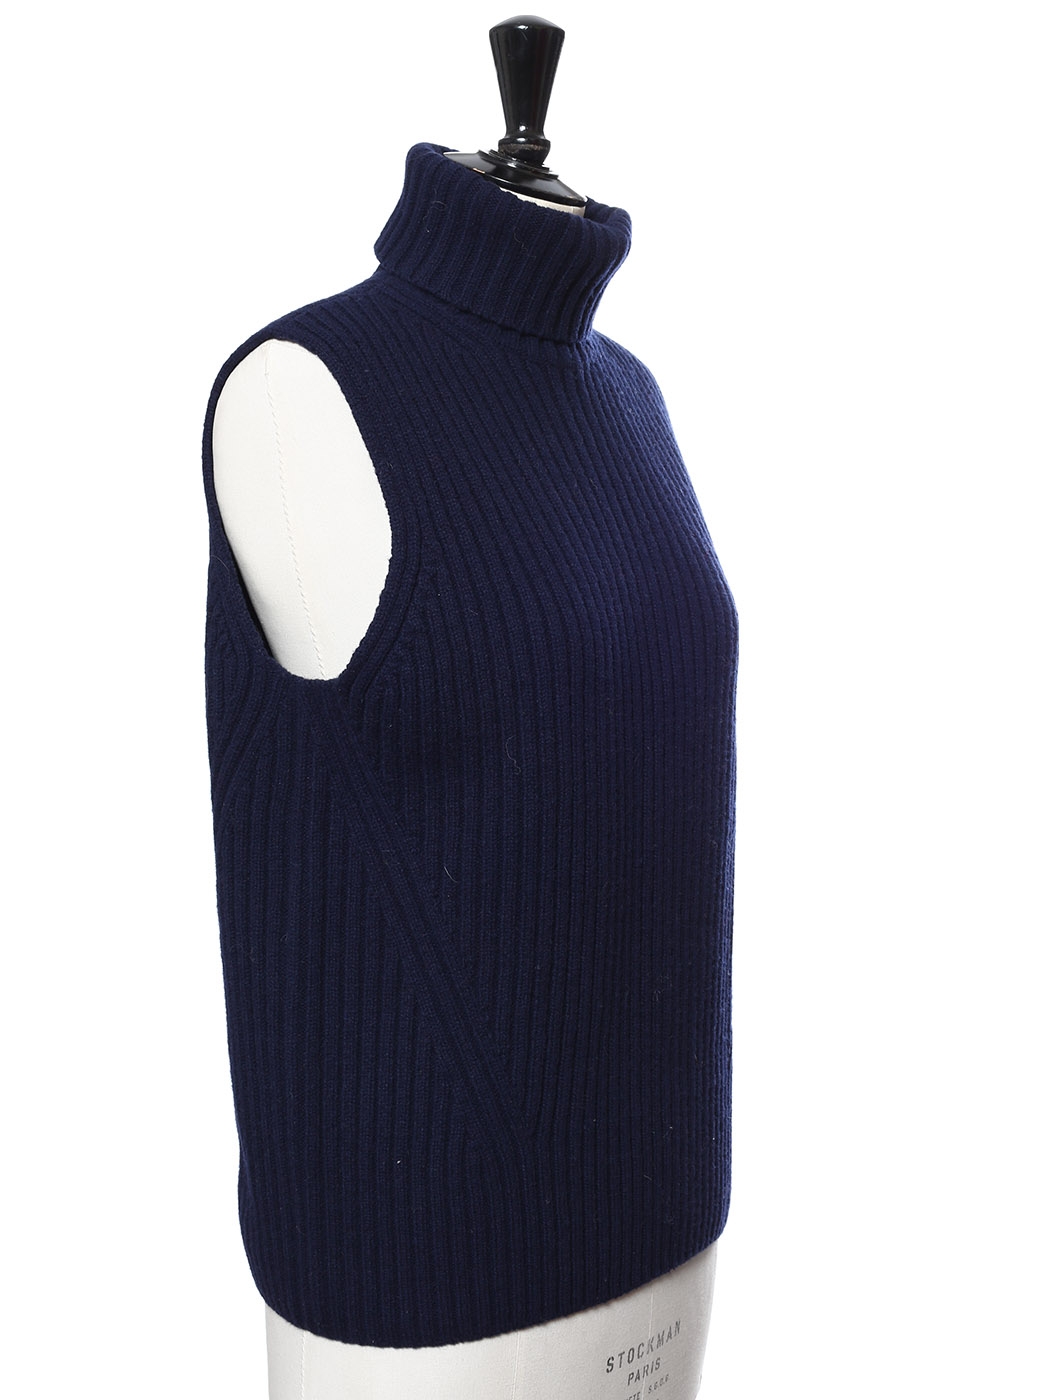 Mango Wool Turtleneck Knitted Gilet Dark in Navy Womens Clothing Jumpers and knitwear Sleeveless jumpers Blue 